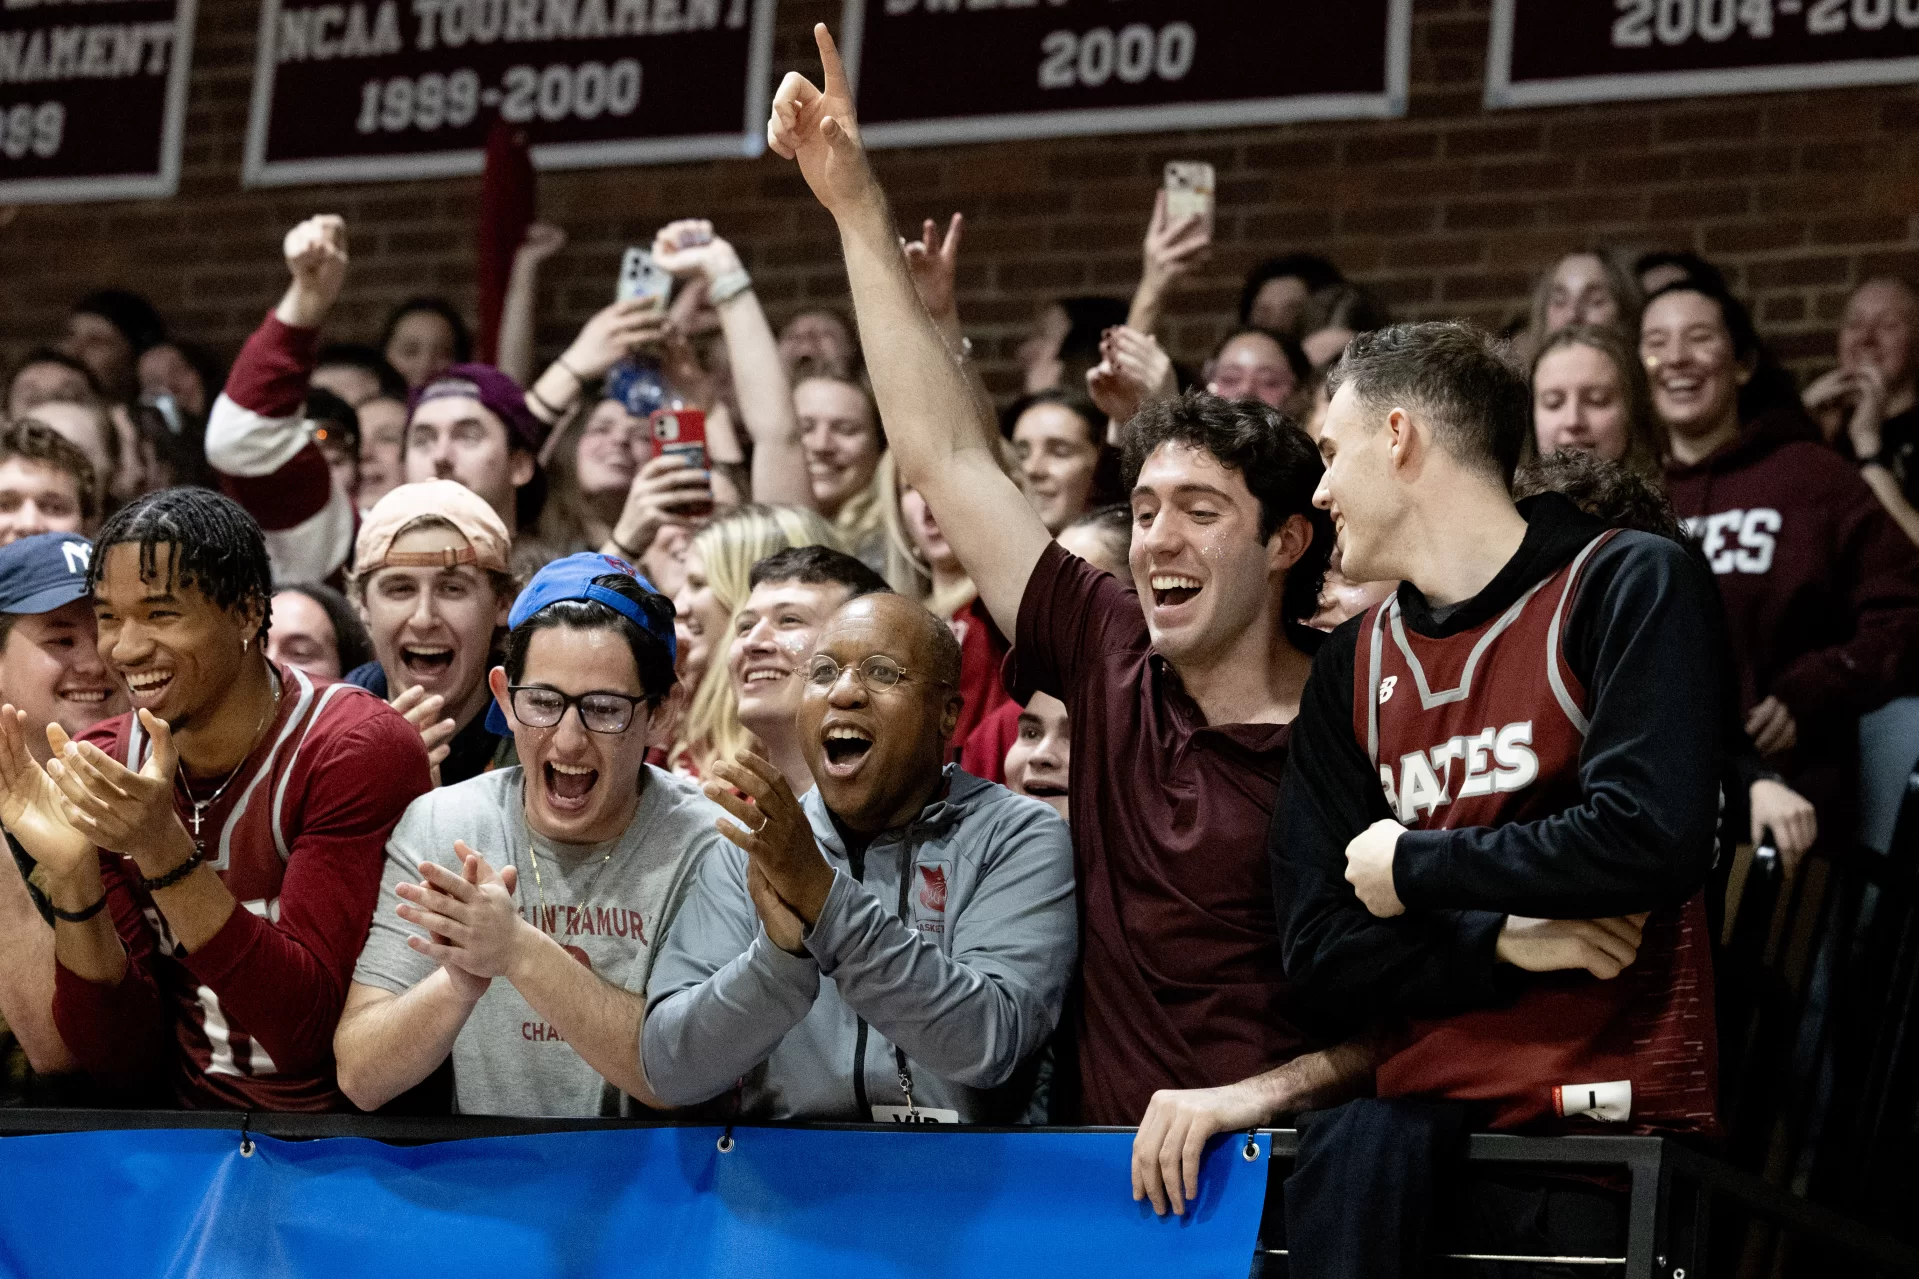 Bates defeated Widener Univeristiy 79-66 in Div III NCAA championship playoffs held in Alumni Gymnasium on March 2, 2024. 

President Garry W. Jenkins joins the fans  on th stage bleachers during the last 90 or so seconds at the end of the game after the gym chanted “We want Garry!.”